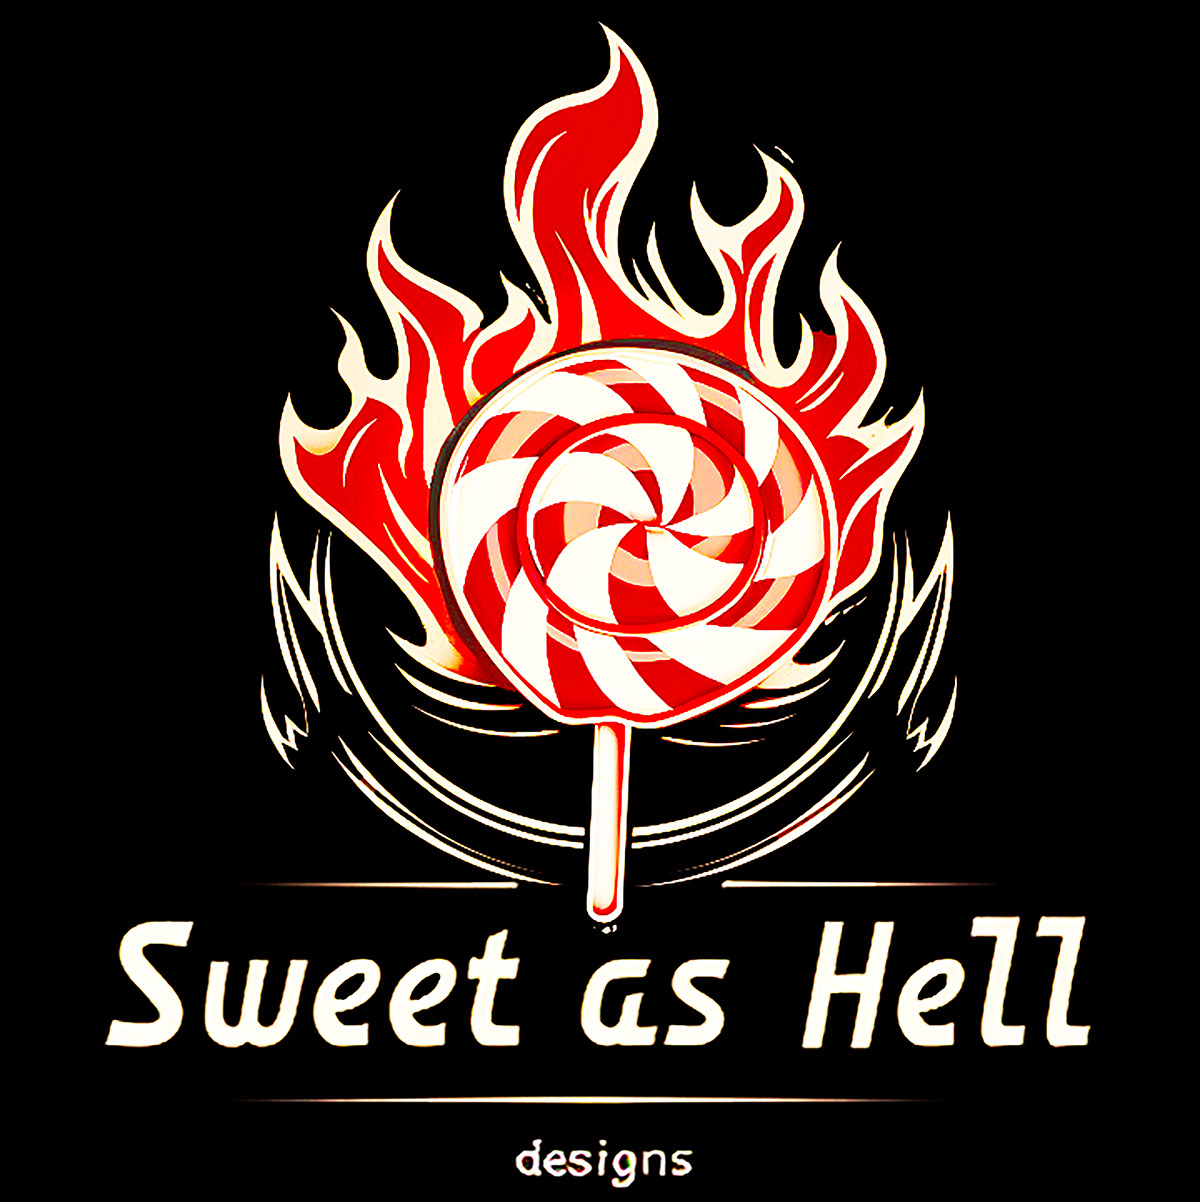 Sweet_As_Hell_Designs_Licensable_Ruffian_no_11 rendition image